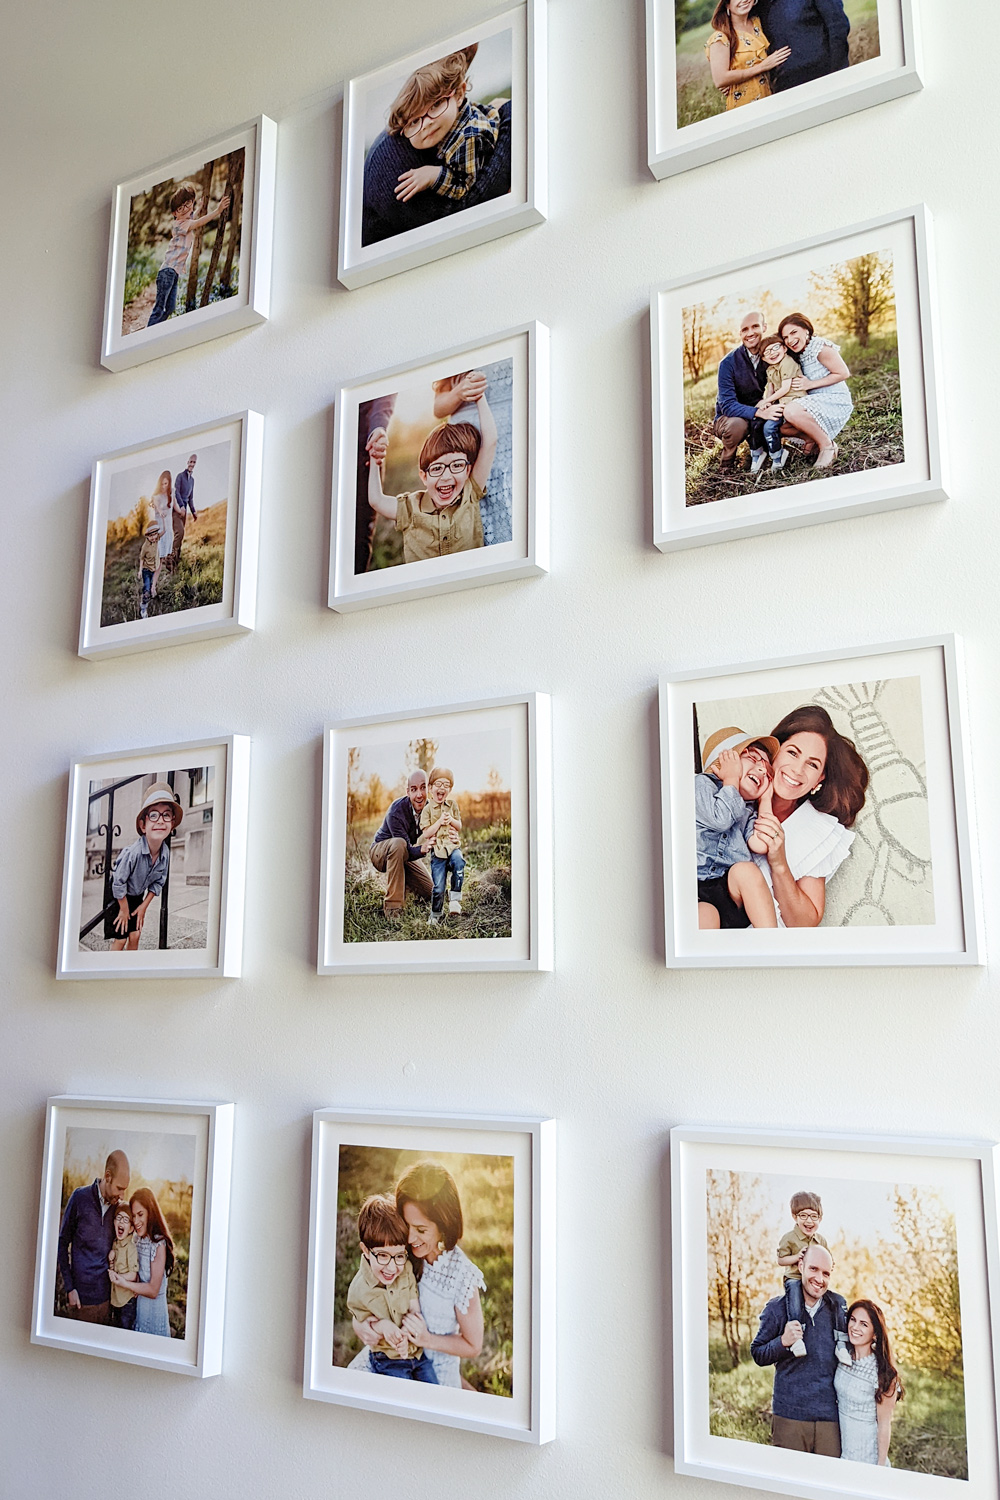 decorating idea for family photos in grid pattern